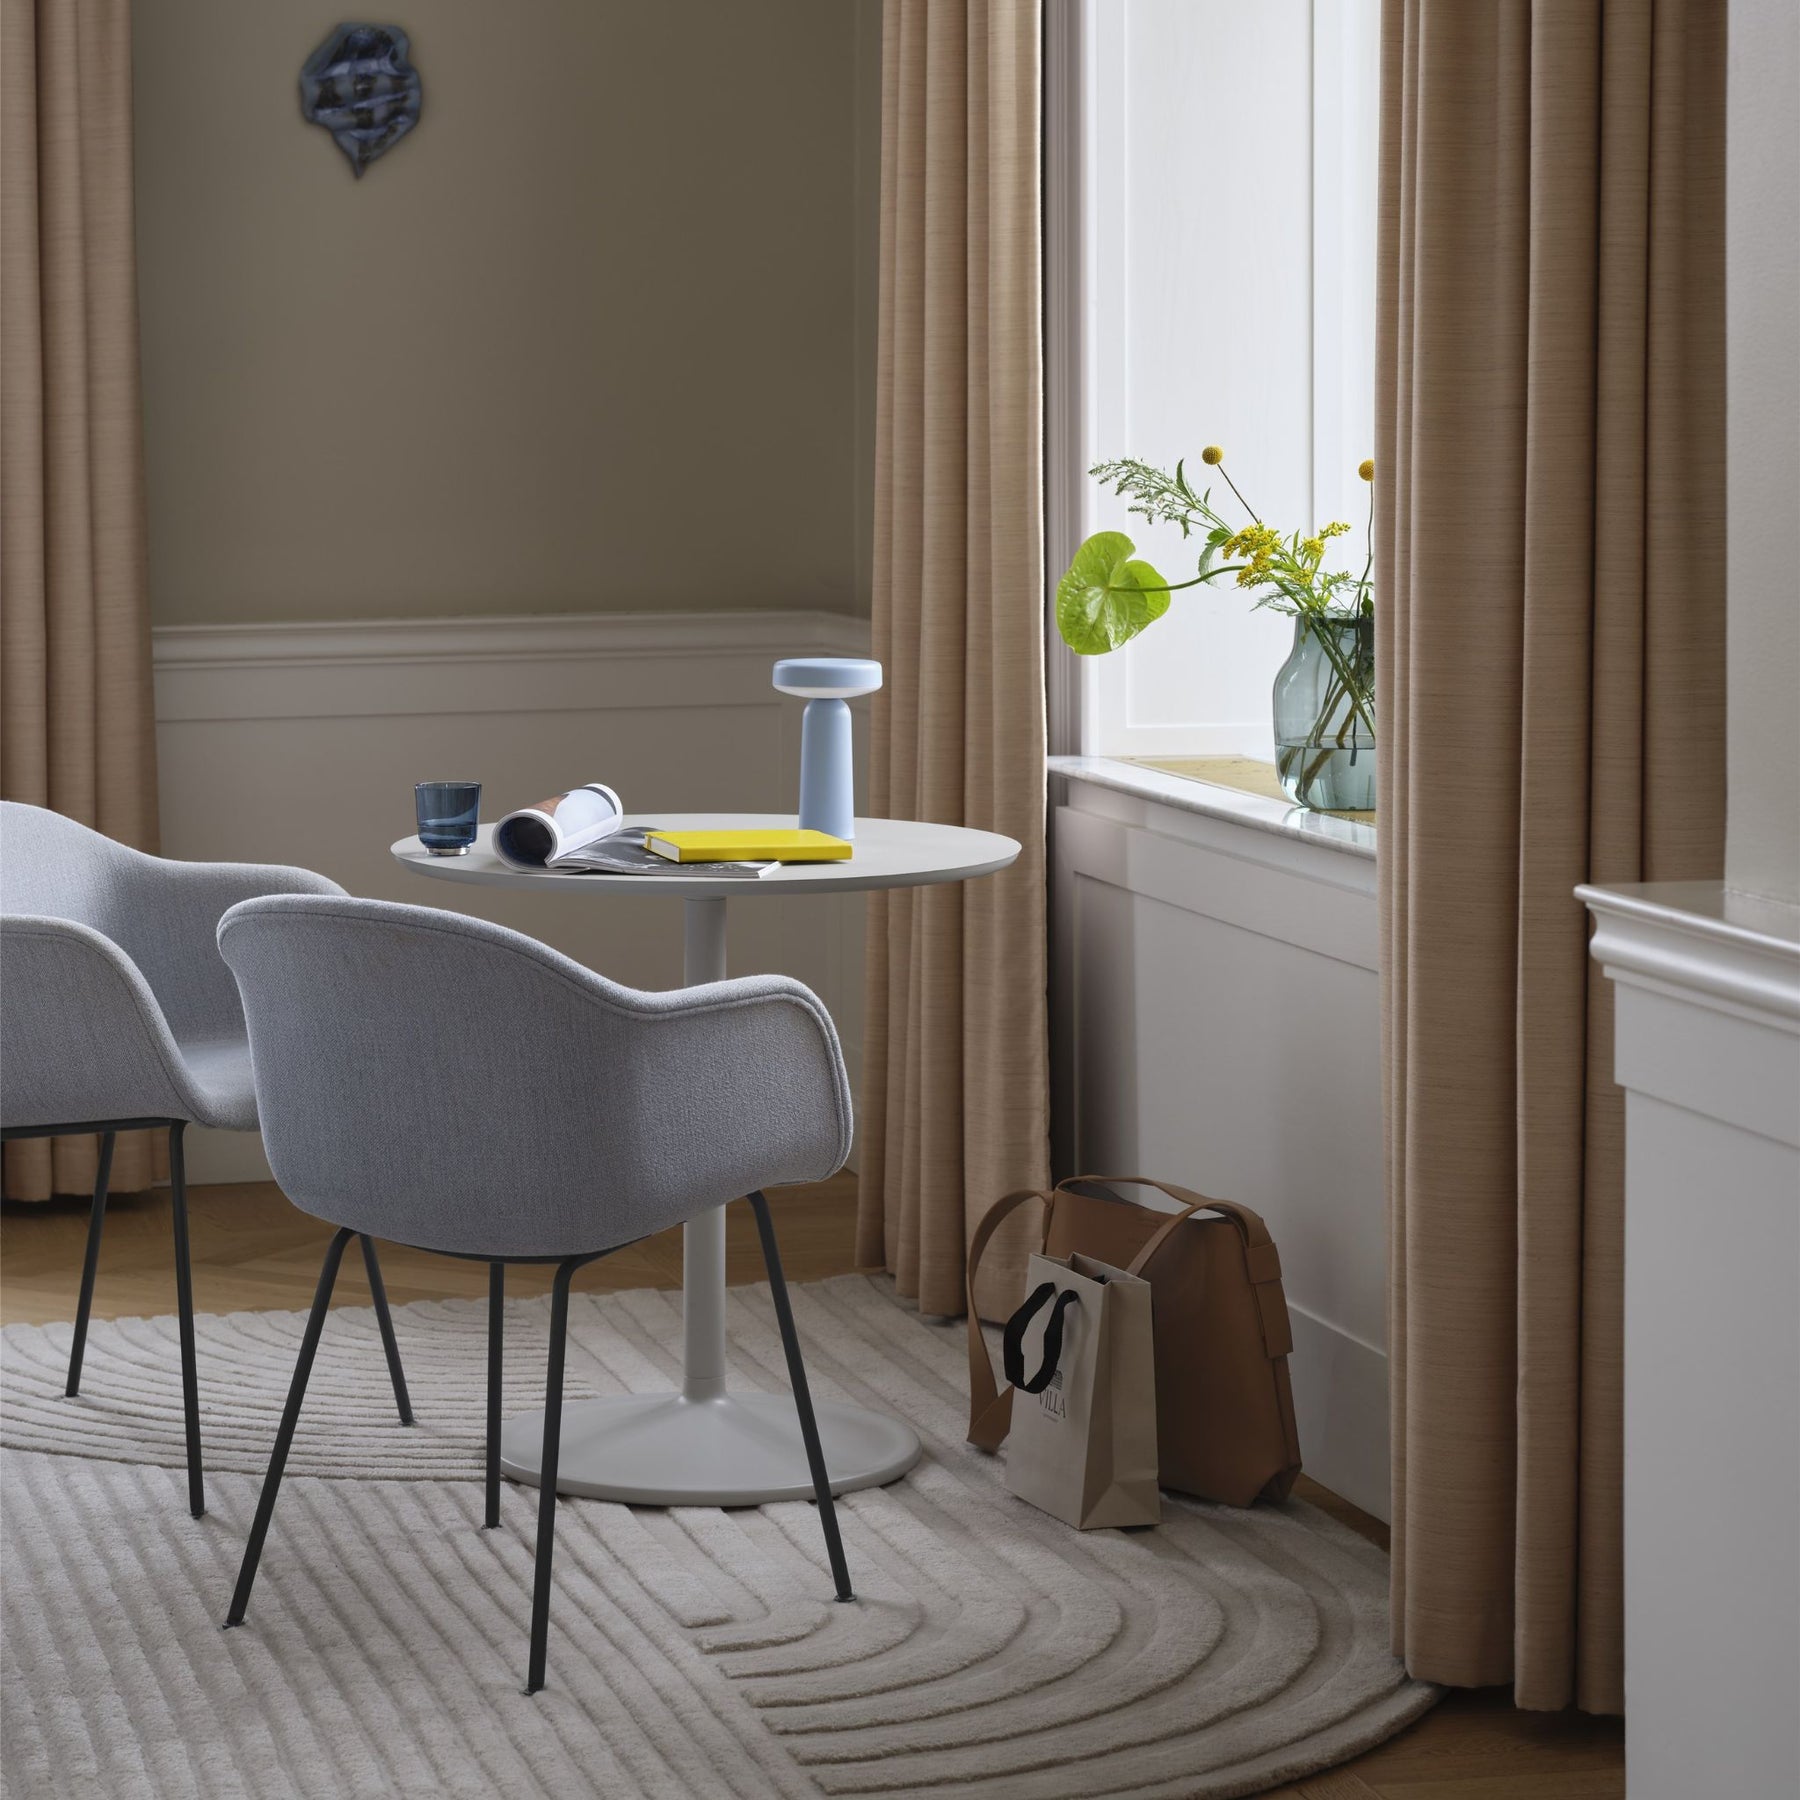 Muuto Relevo Rug with Fiber dining Chairs and Soft Cafe Table in Copenhagen Living Room by Window